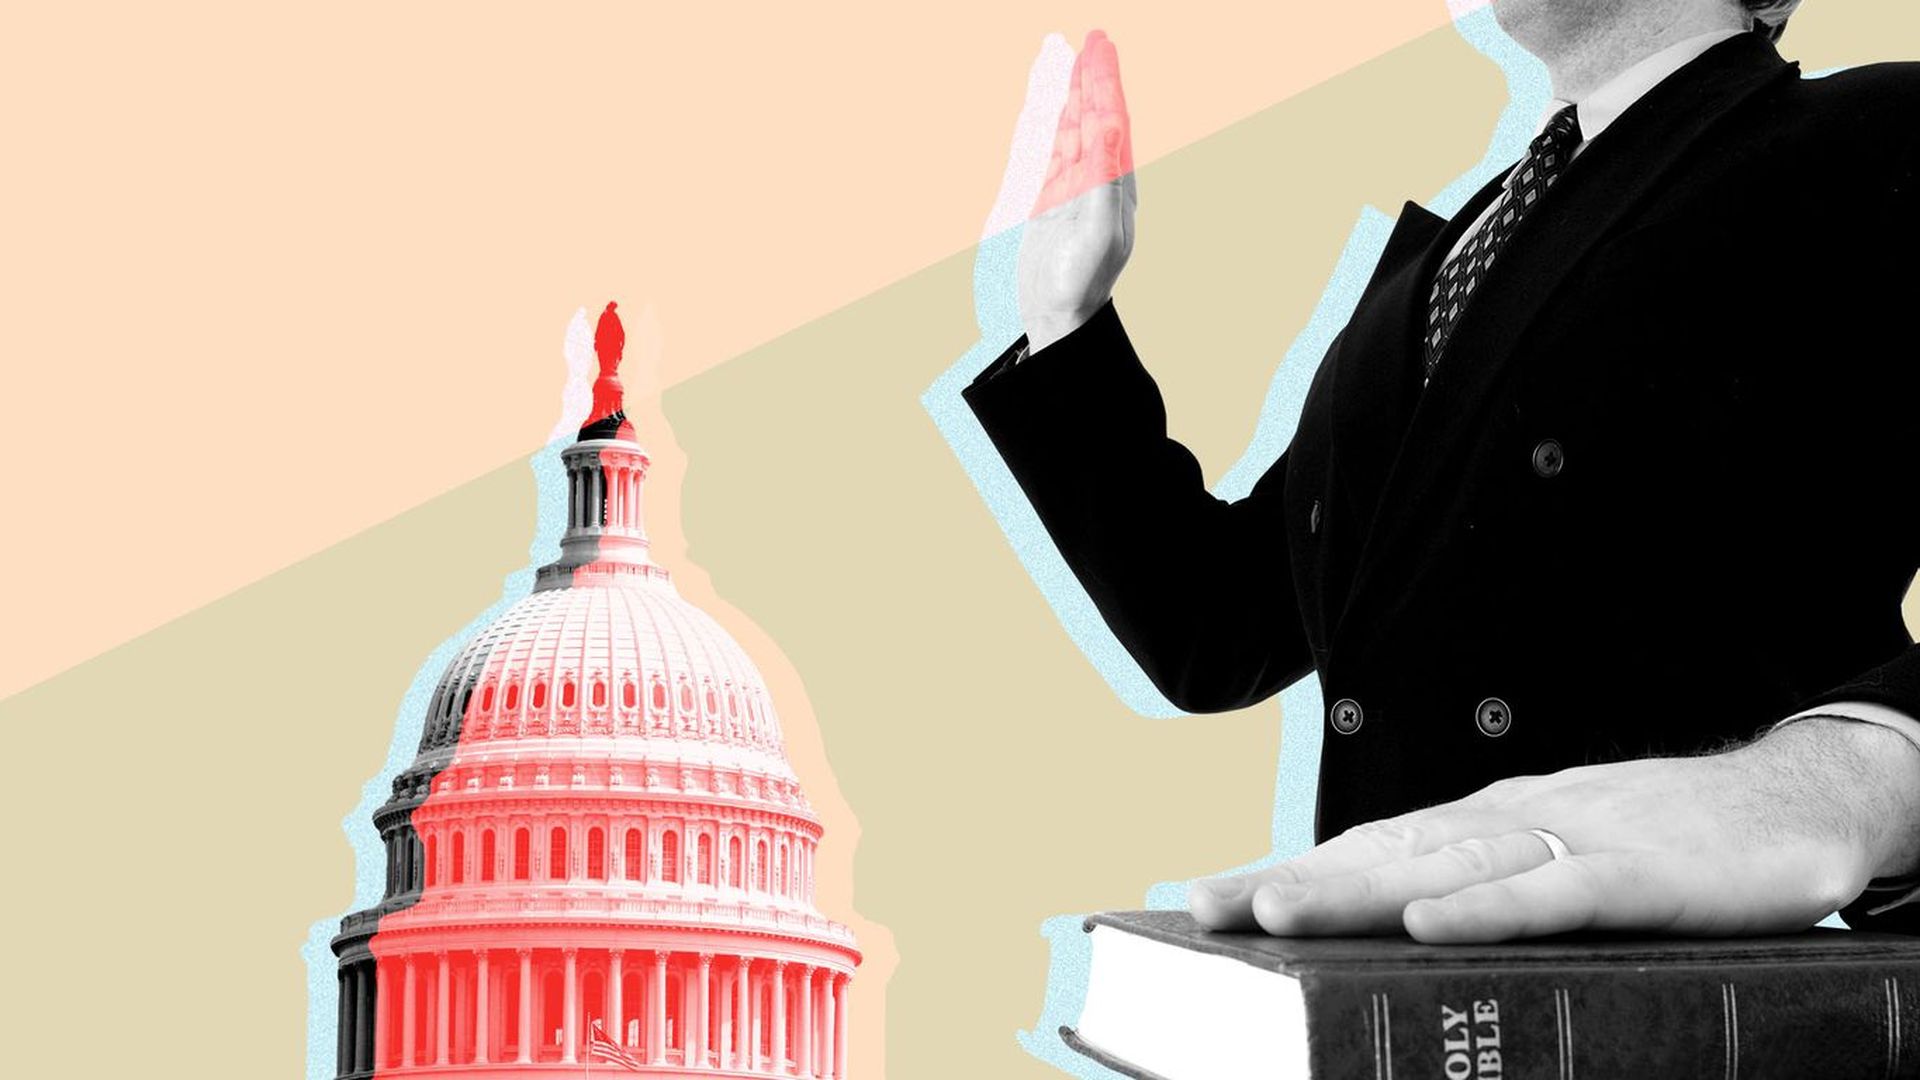 Photo illustration of a man swearing on a bible with the U.S. Capitol dome in the background.